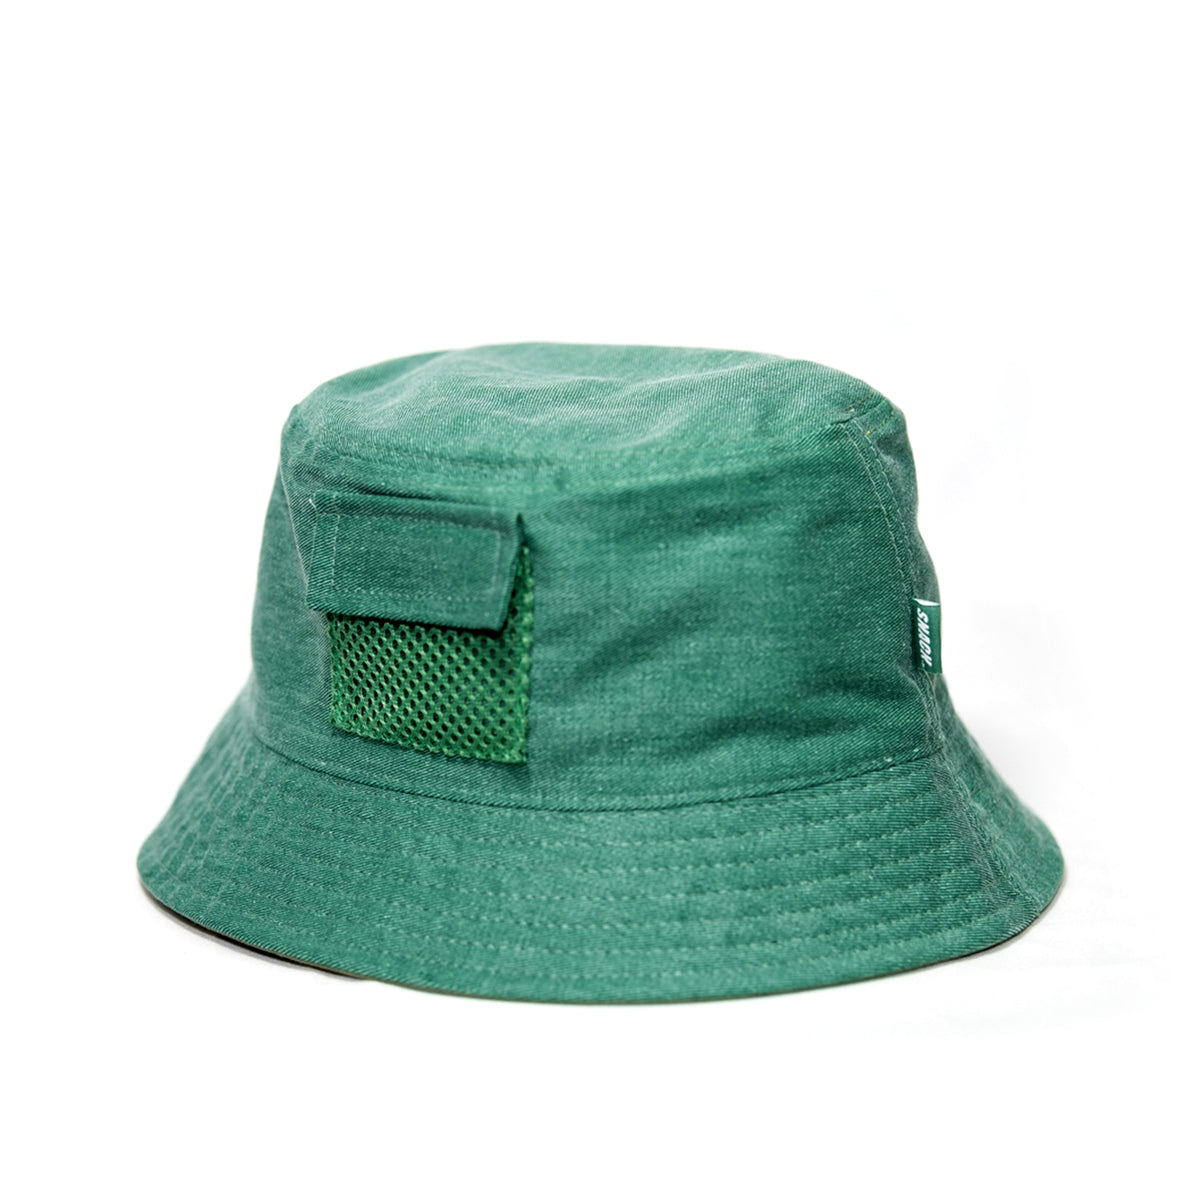 Eat Your Greens & Berry Blend Reversible bucket hat